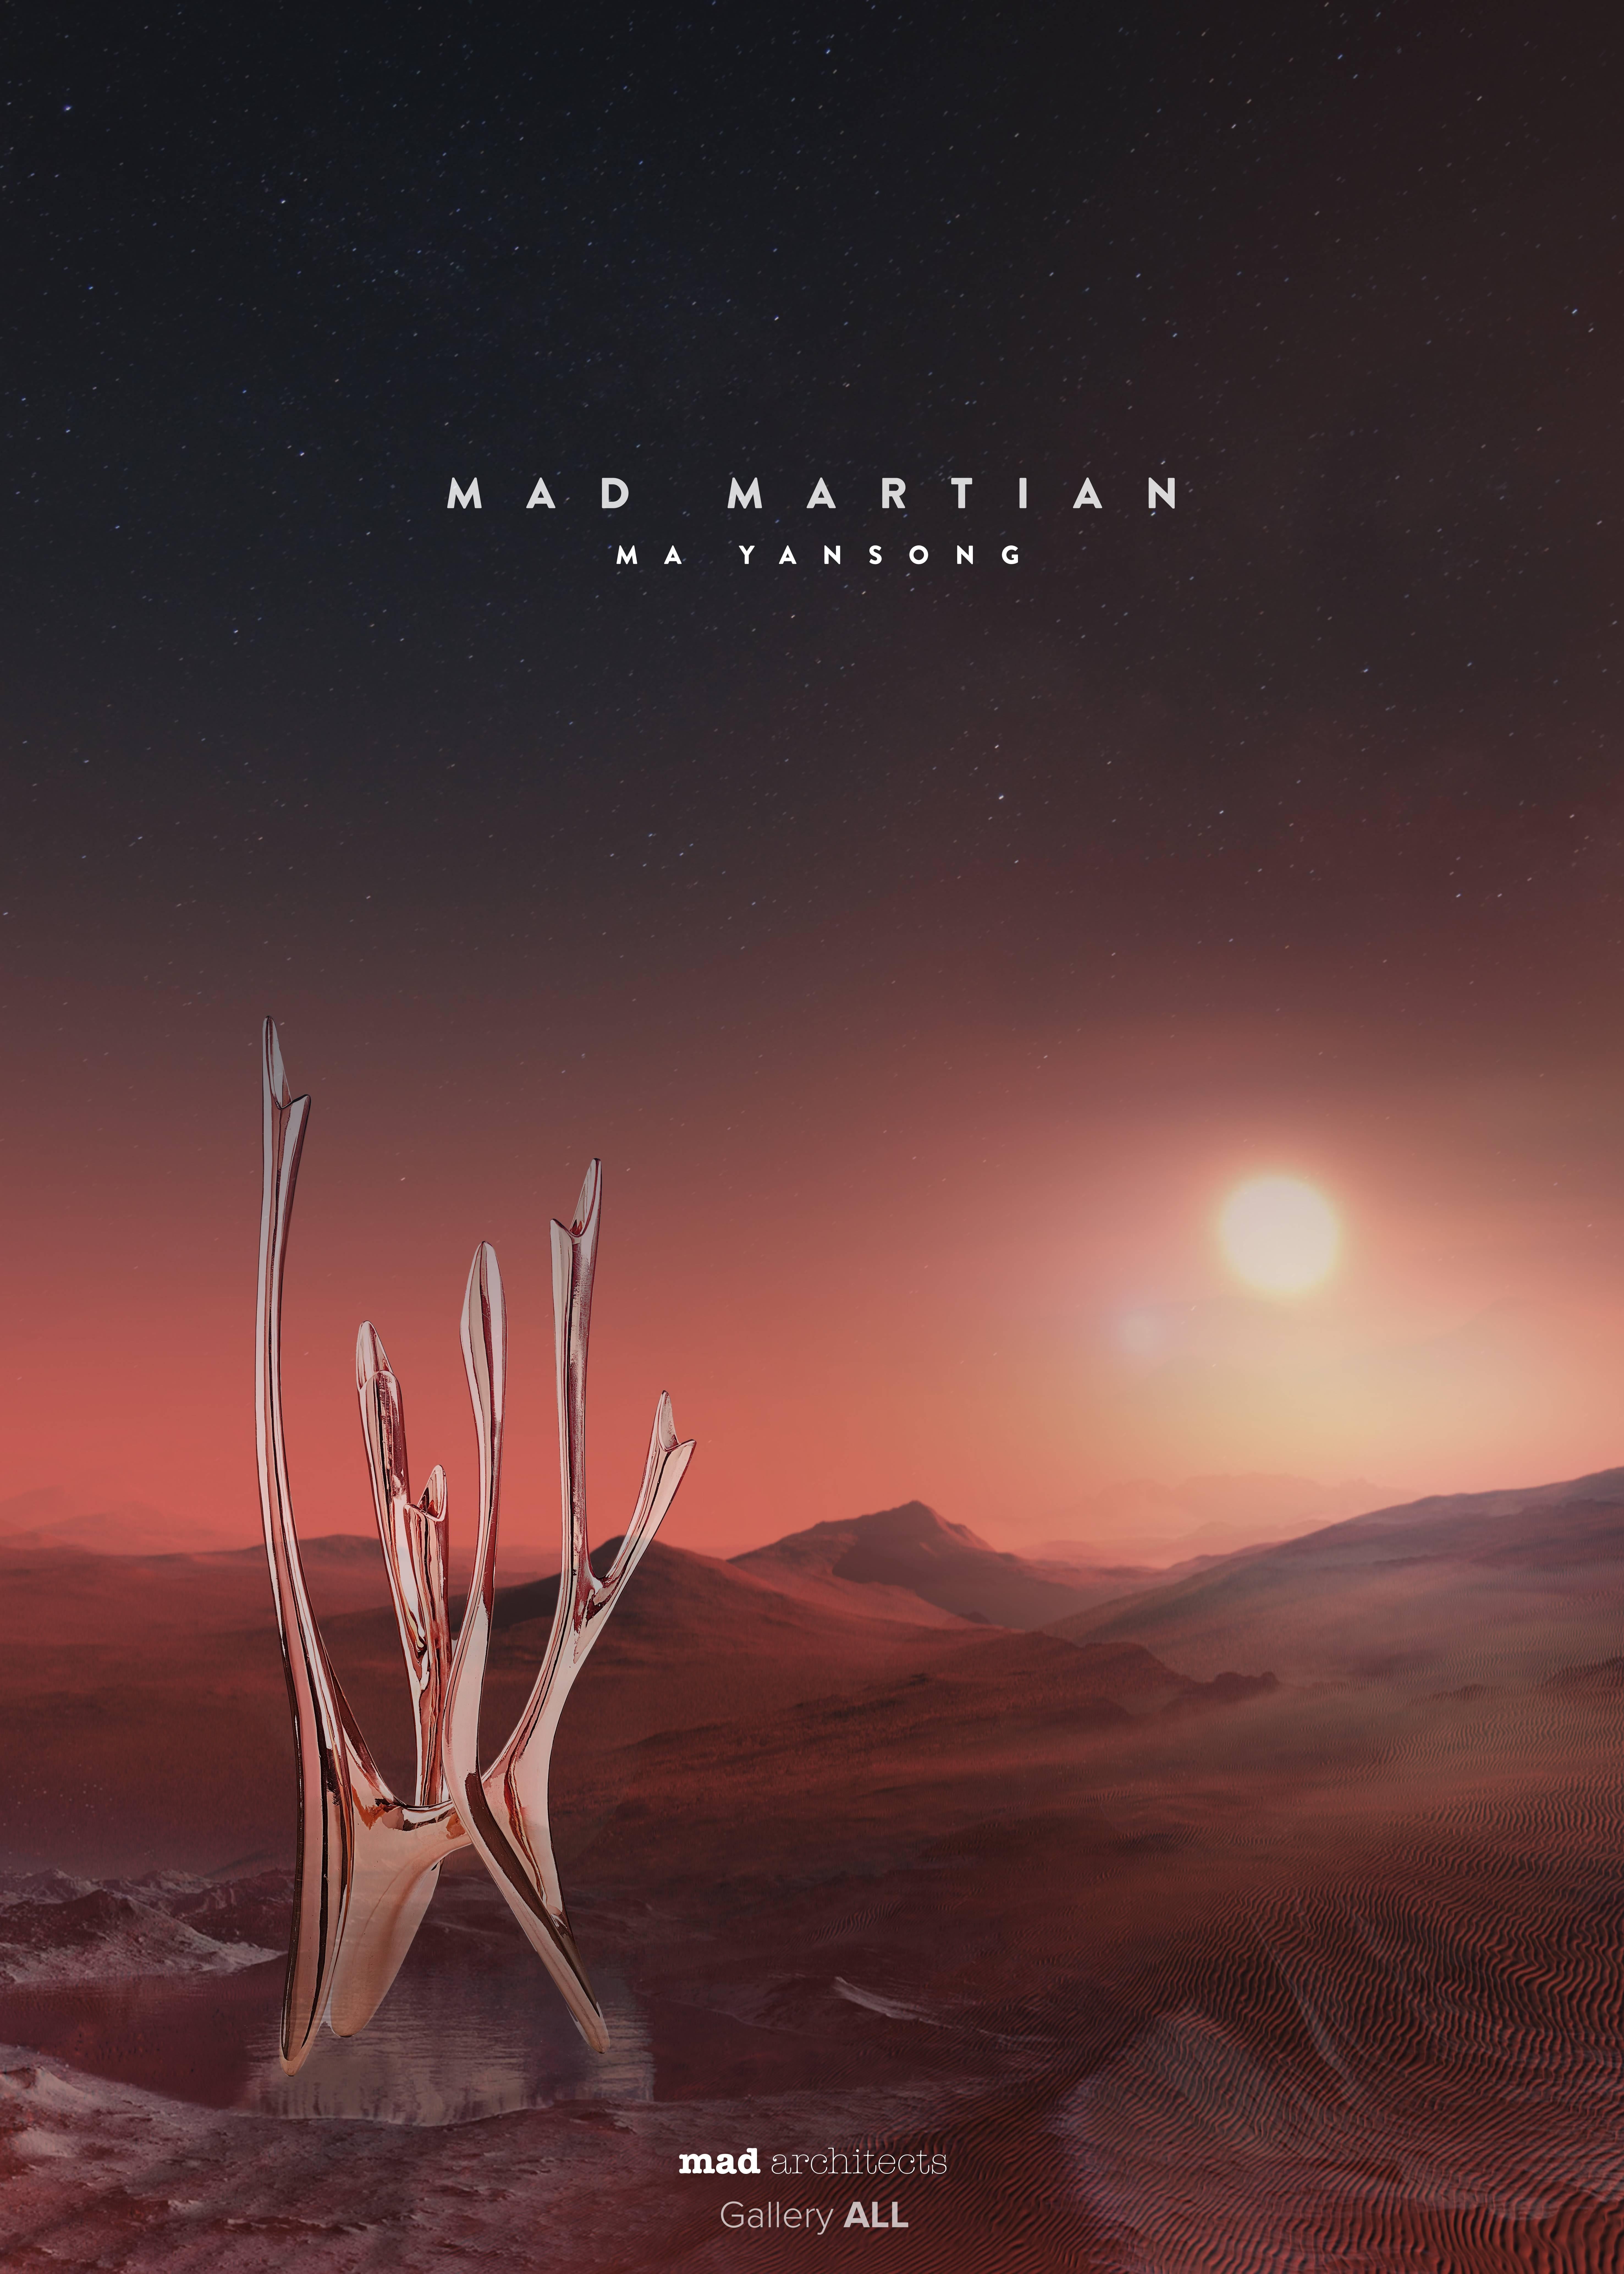 The MAD Martian collection began with a question: What would the Chinese colonization of a Martian planet look like? This naturally led to more questions such as at what point does survival stop and architecture begin? Once survival is assured, what